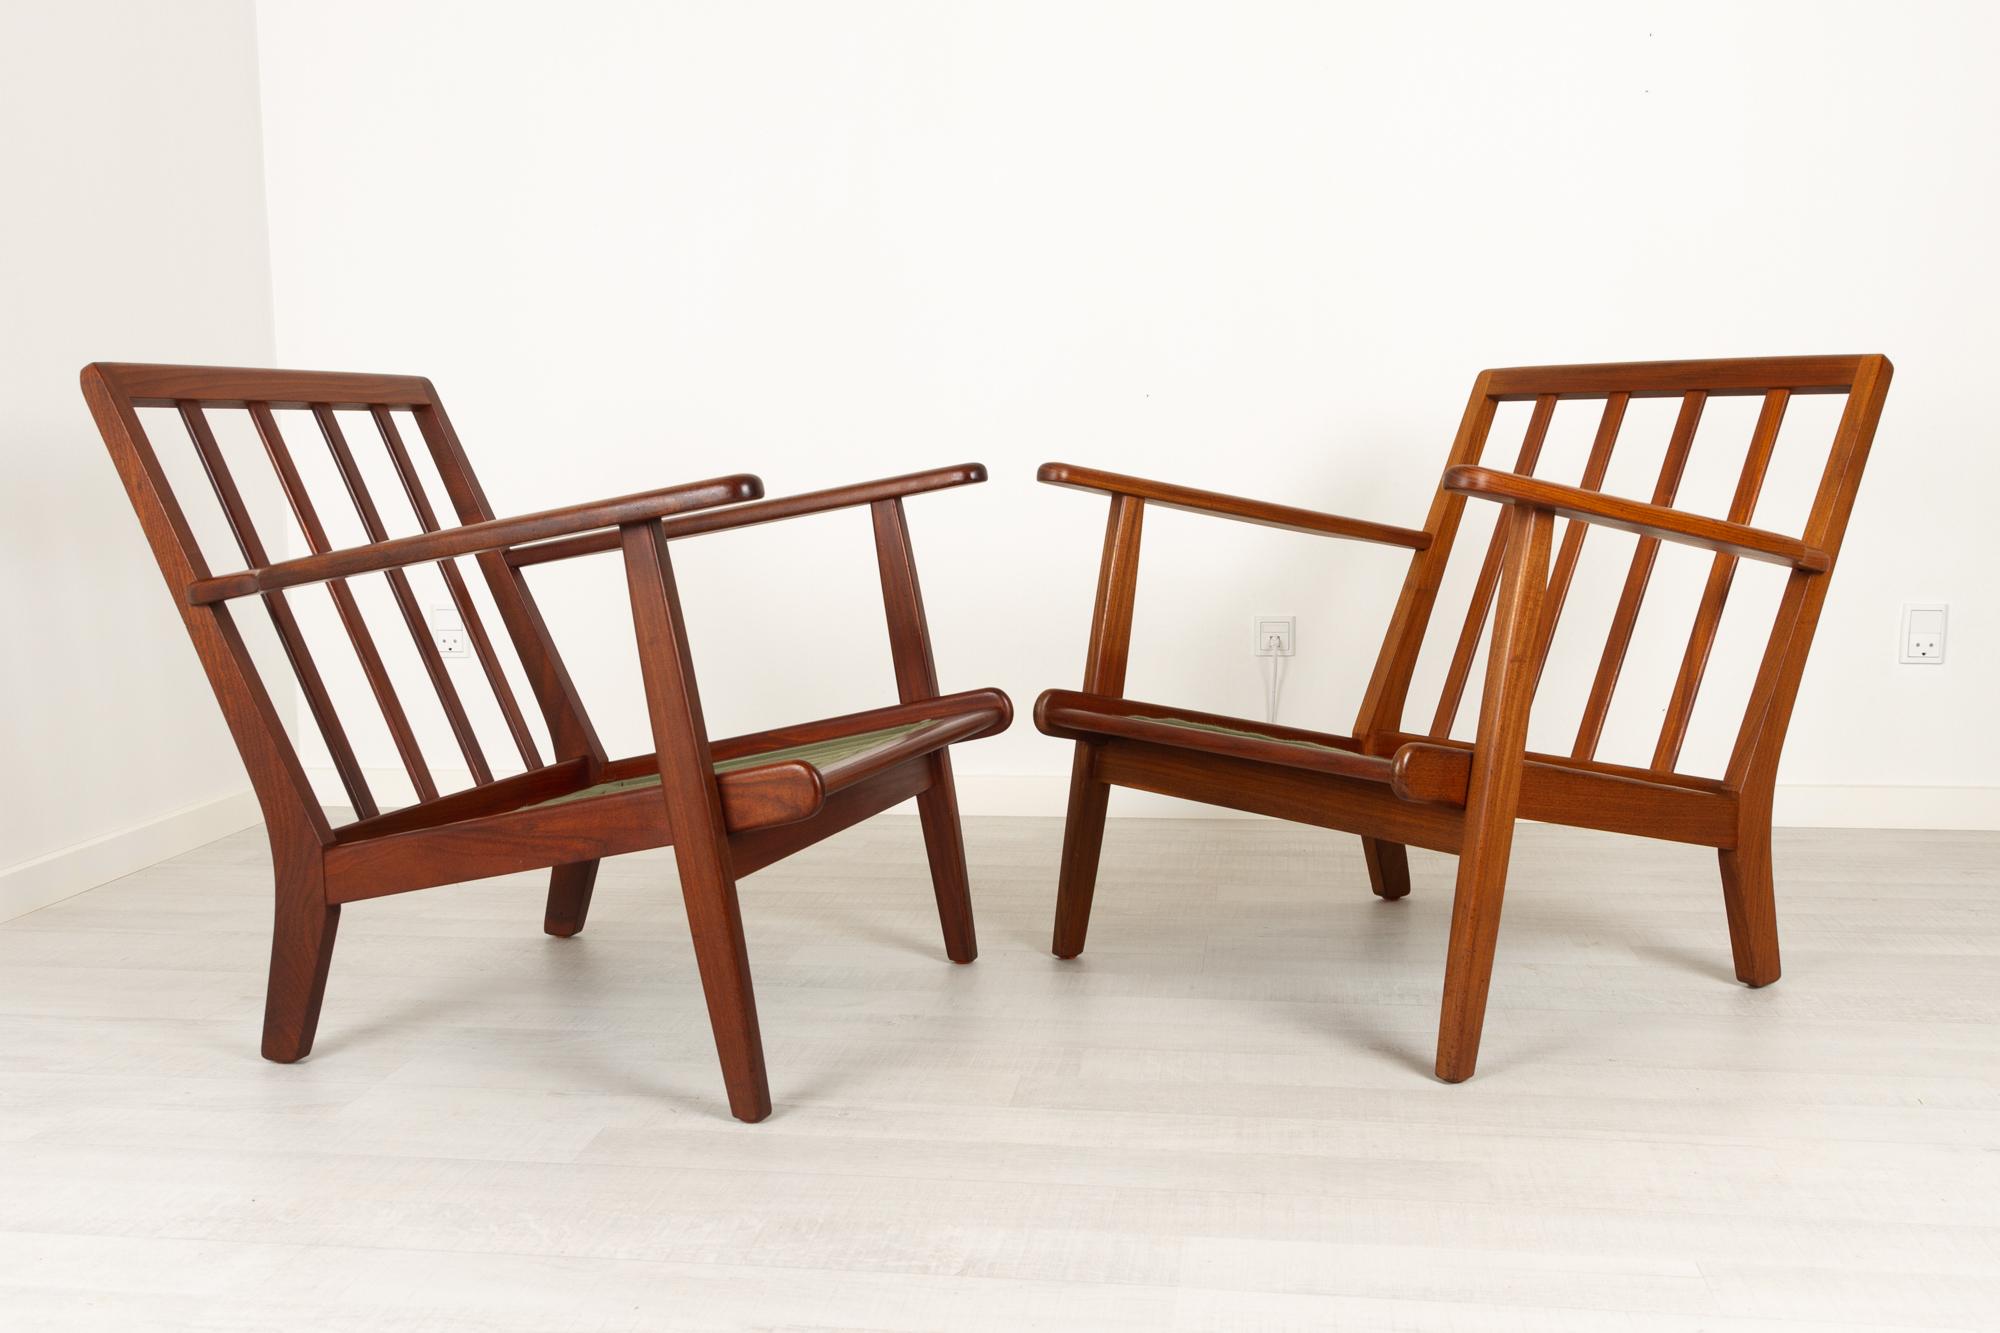 Vintage Danish Lounge Chairs by Aage Pedersen for GETAMA 1960s, Set of 2 For Sale 2